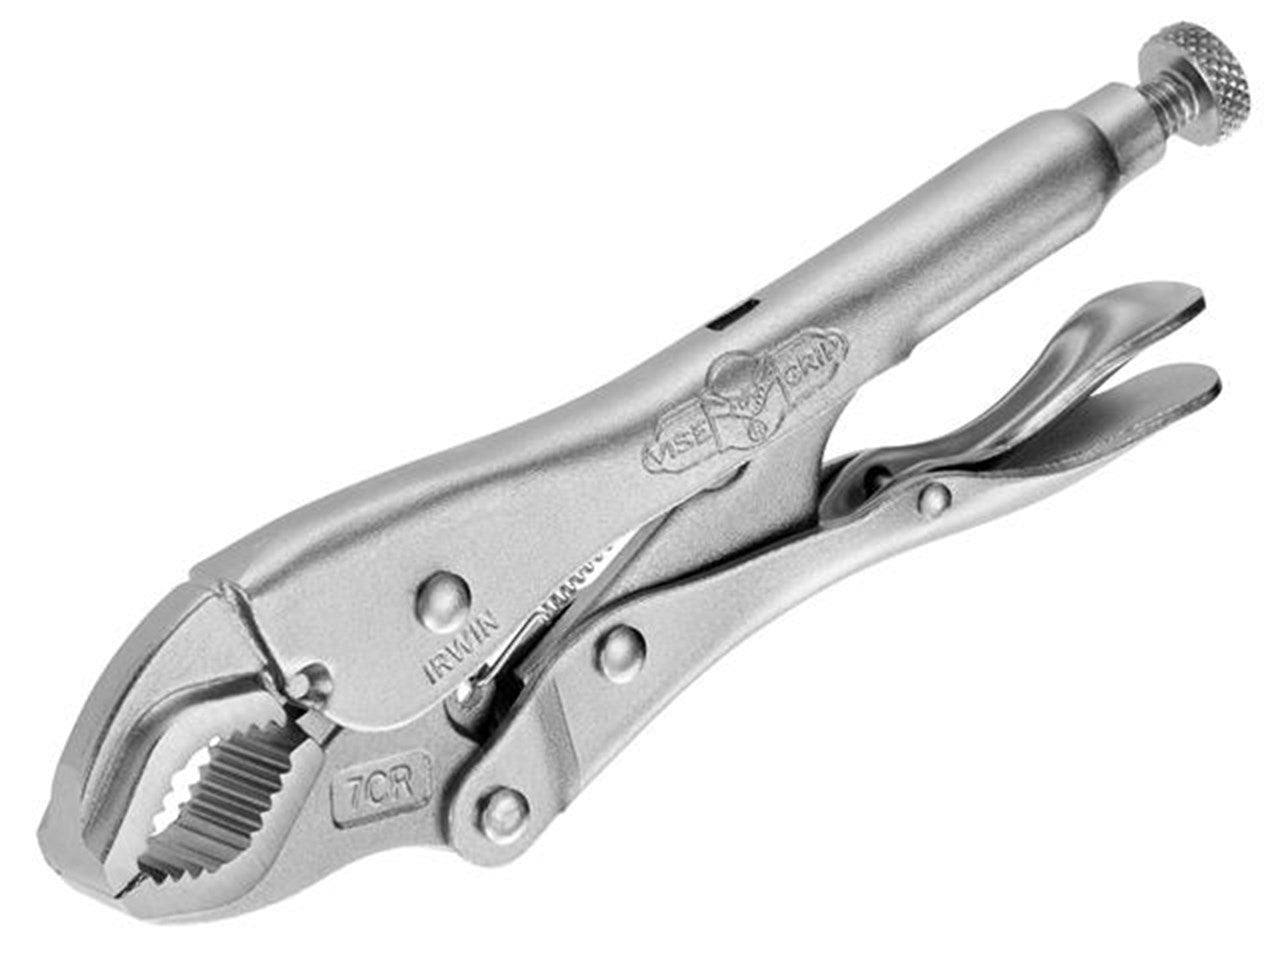 Irwin IW0021035 Vise-Grip Pliers Curved Jaw 7CR